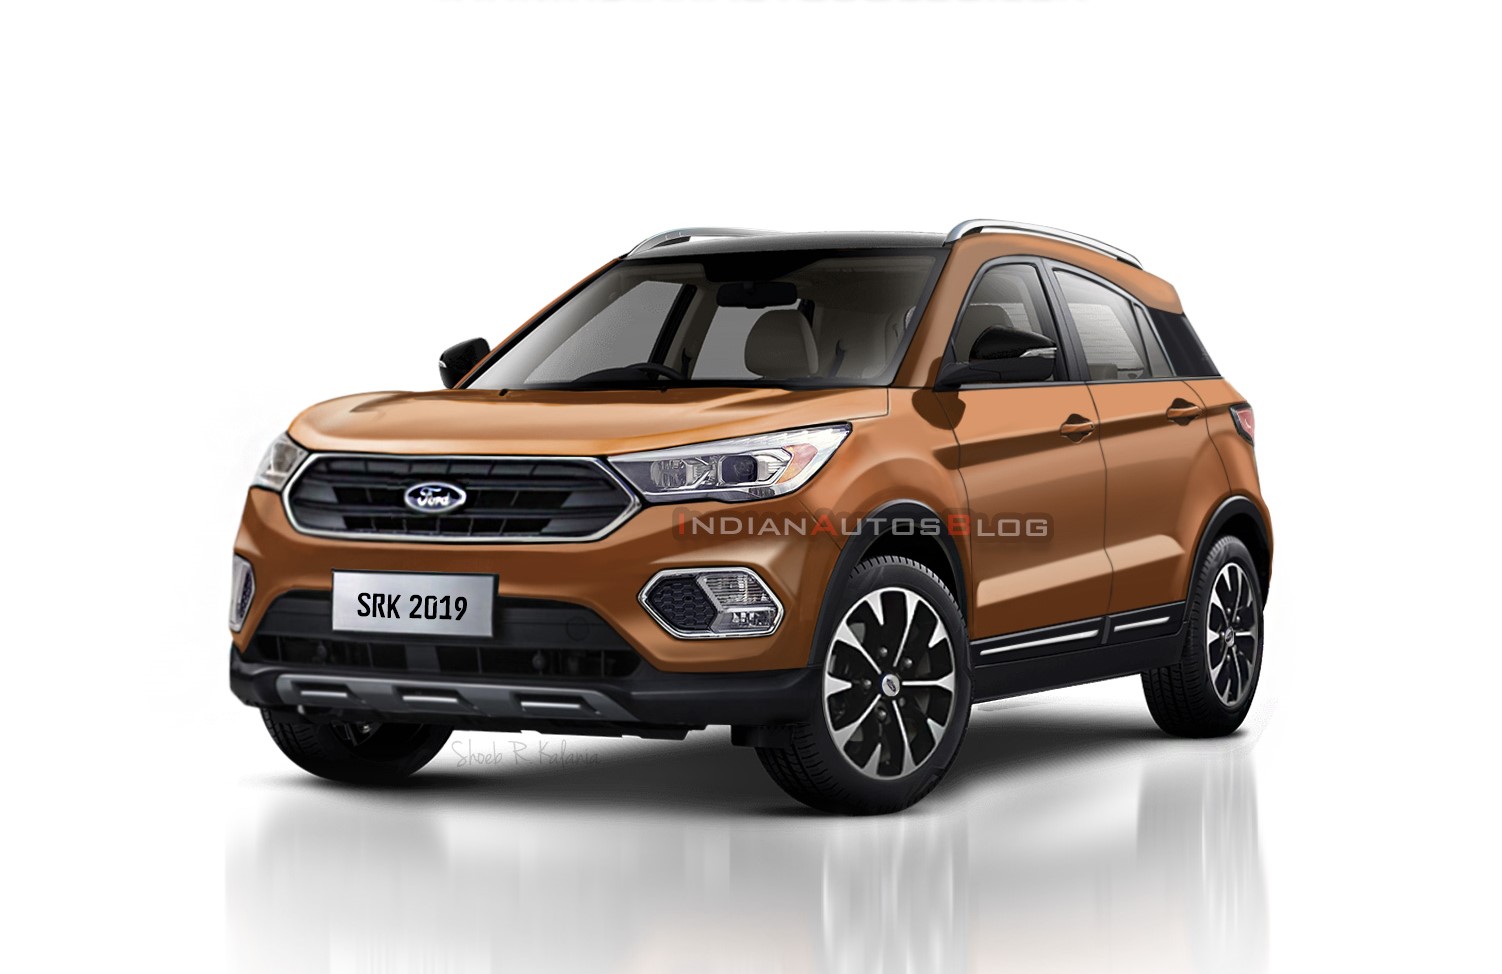 2020 Ford Ecosport BS6 Spied!